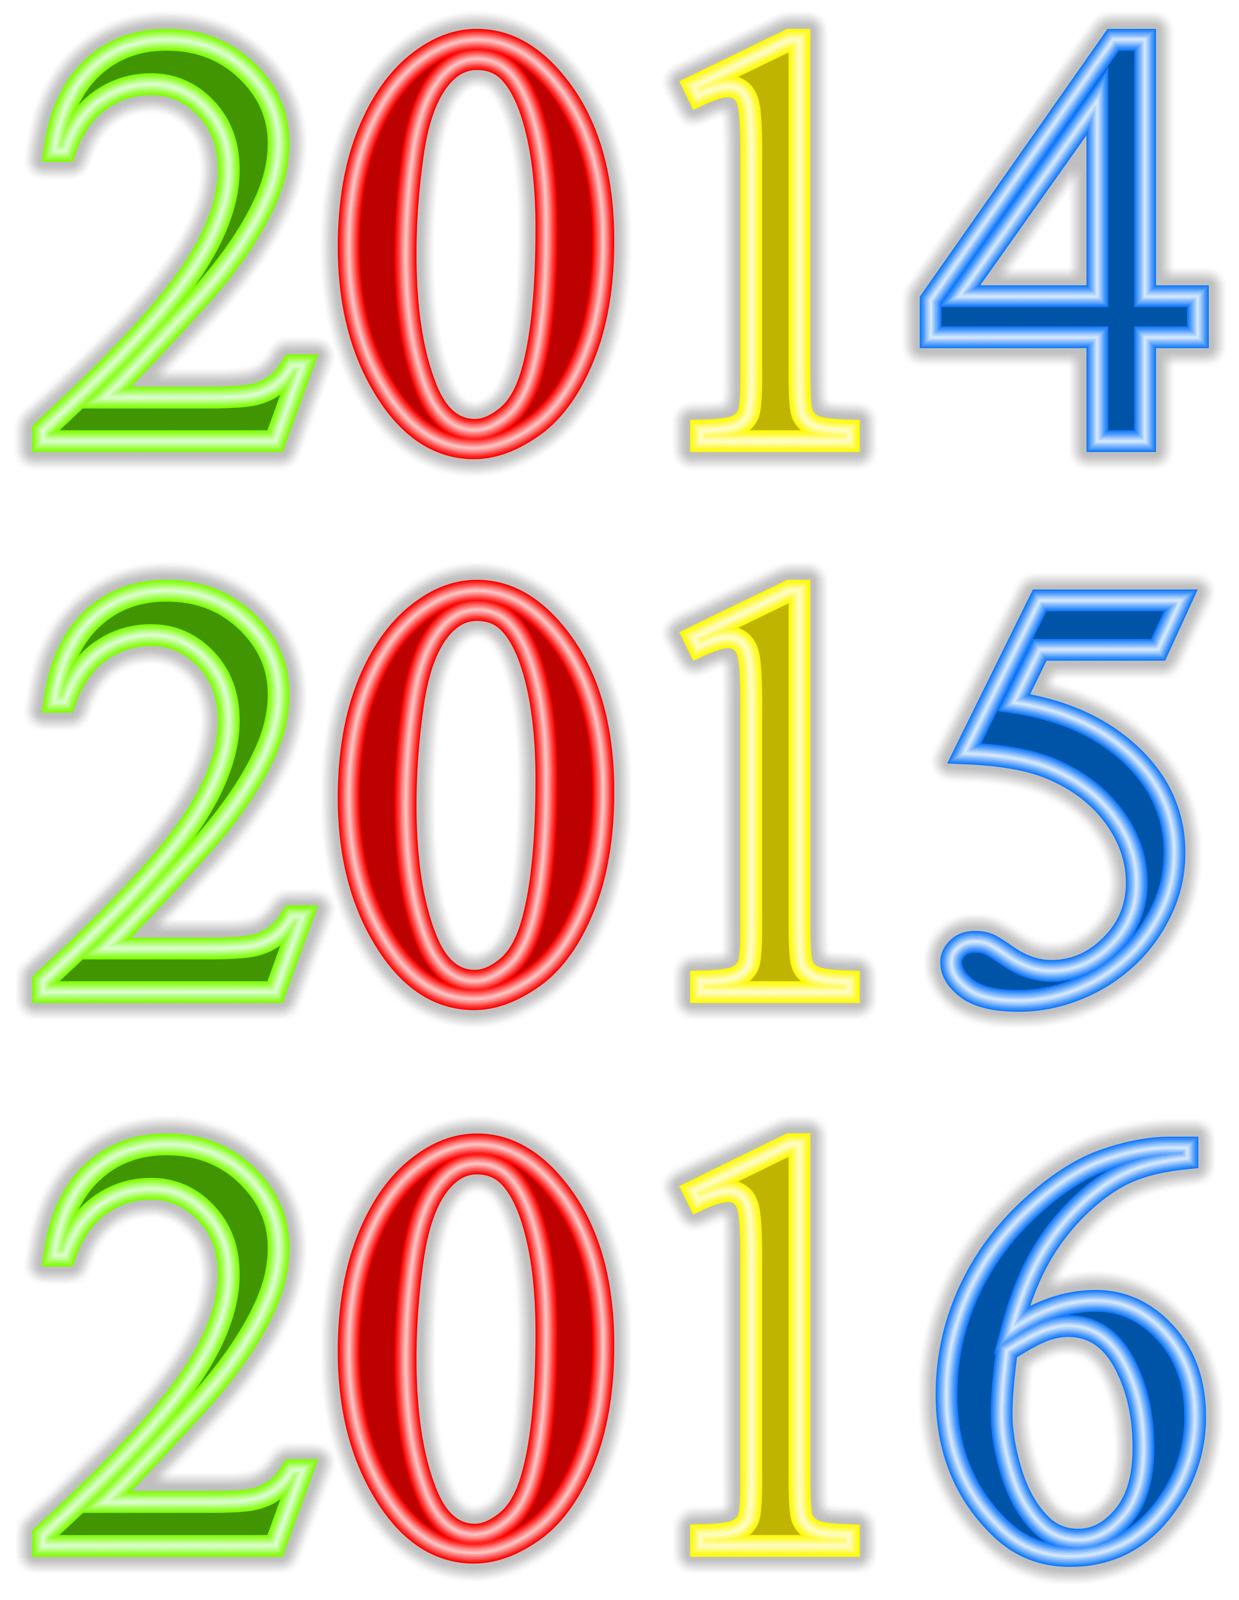 new year's day 2014 clipart - photo #20